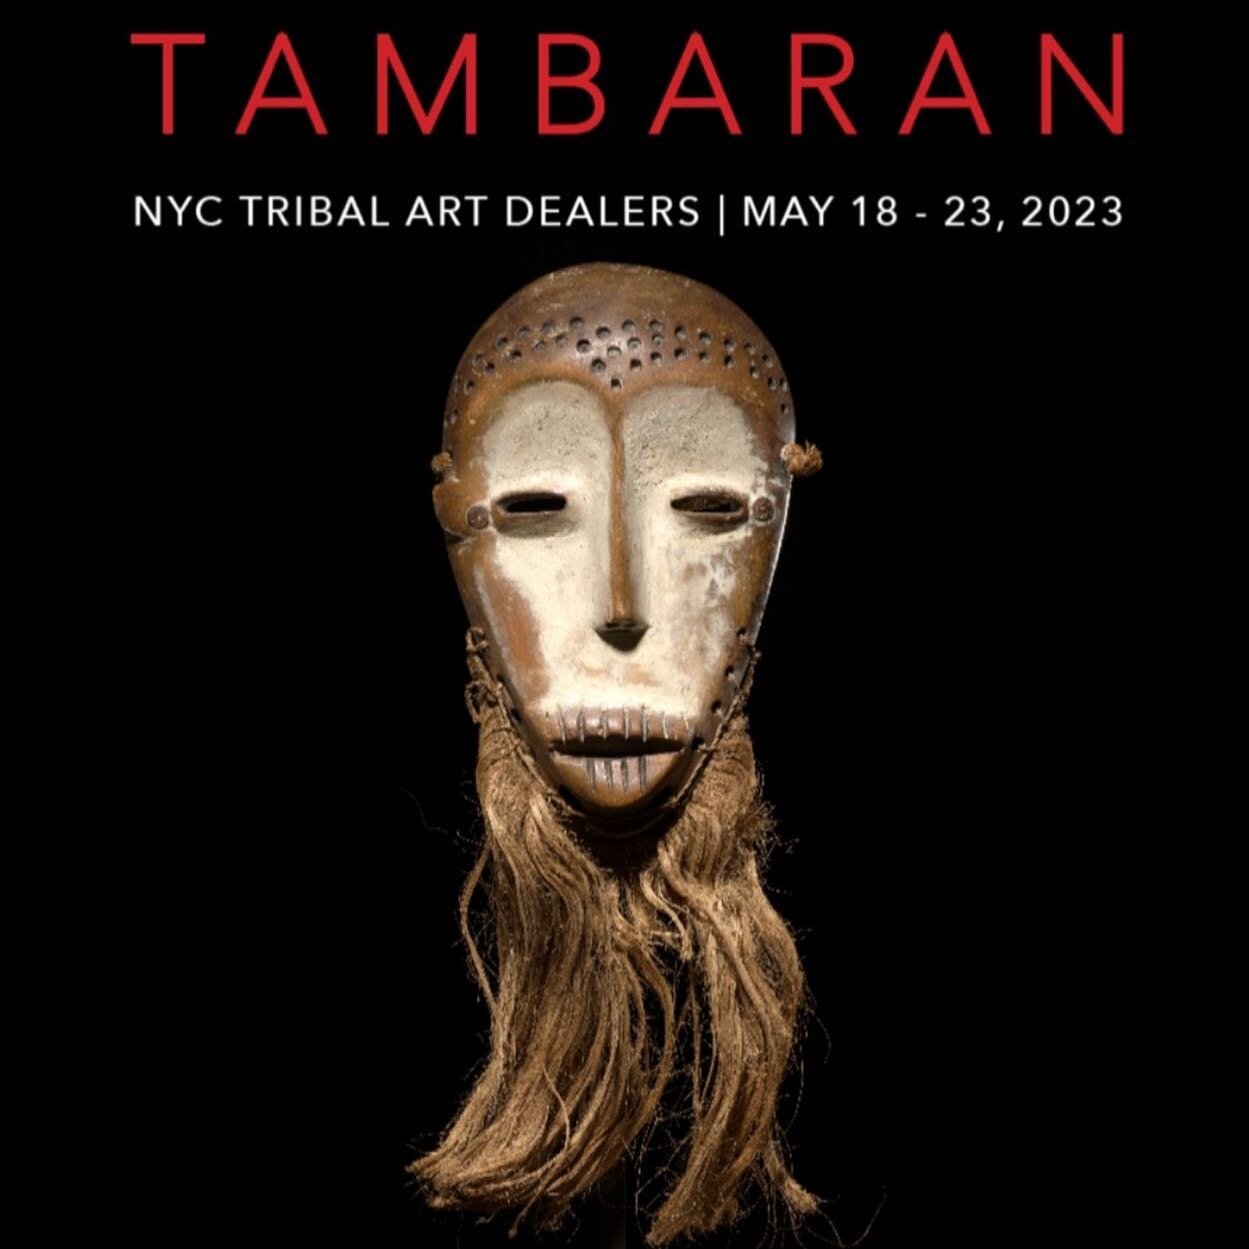 Tonight at @tambarangallery 🔴 

Dear Friends, Approaching the Art auction season, we have joined forces to give representation to the New York City Tribal Art Dealers!

Please visit
Tambaran Gallery
Kloman Art
James Stephenson African Art

5 East 82